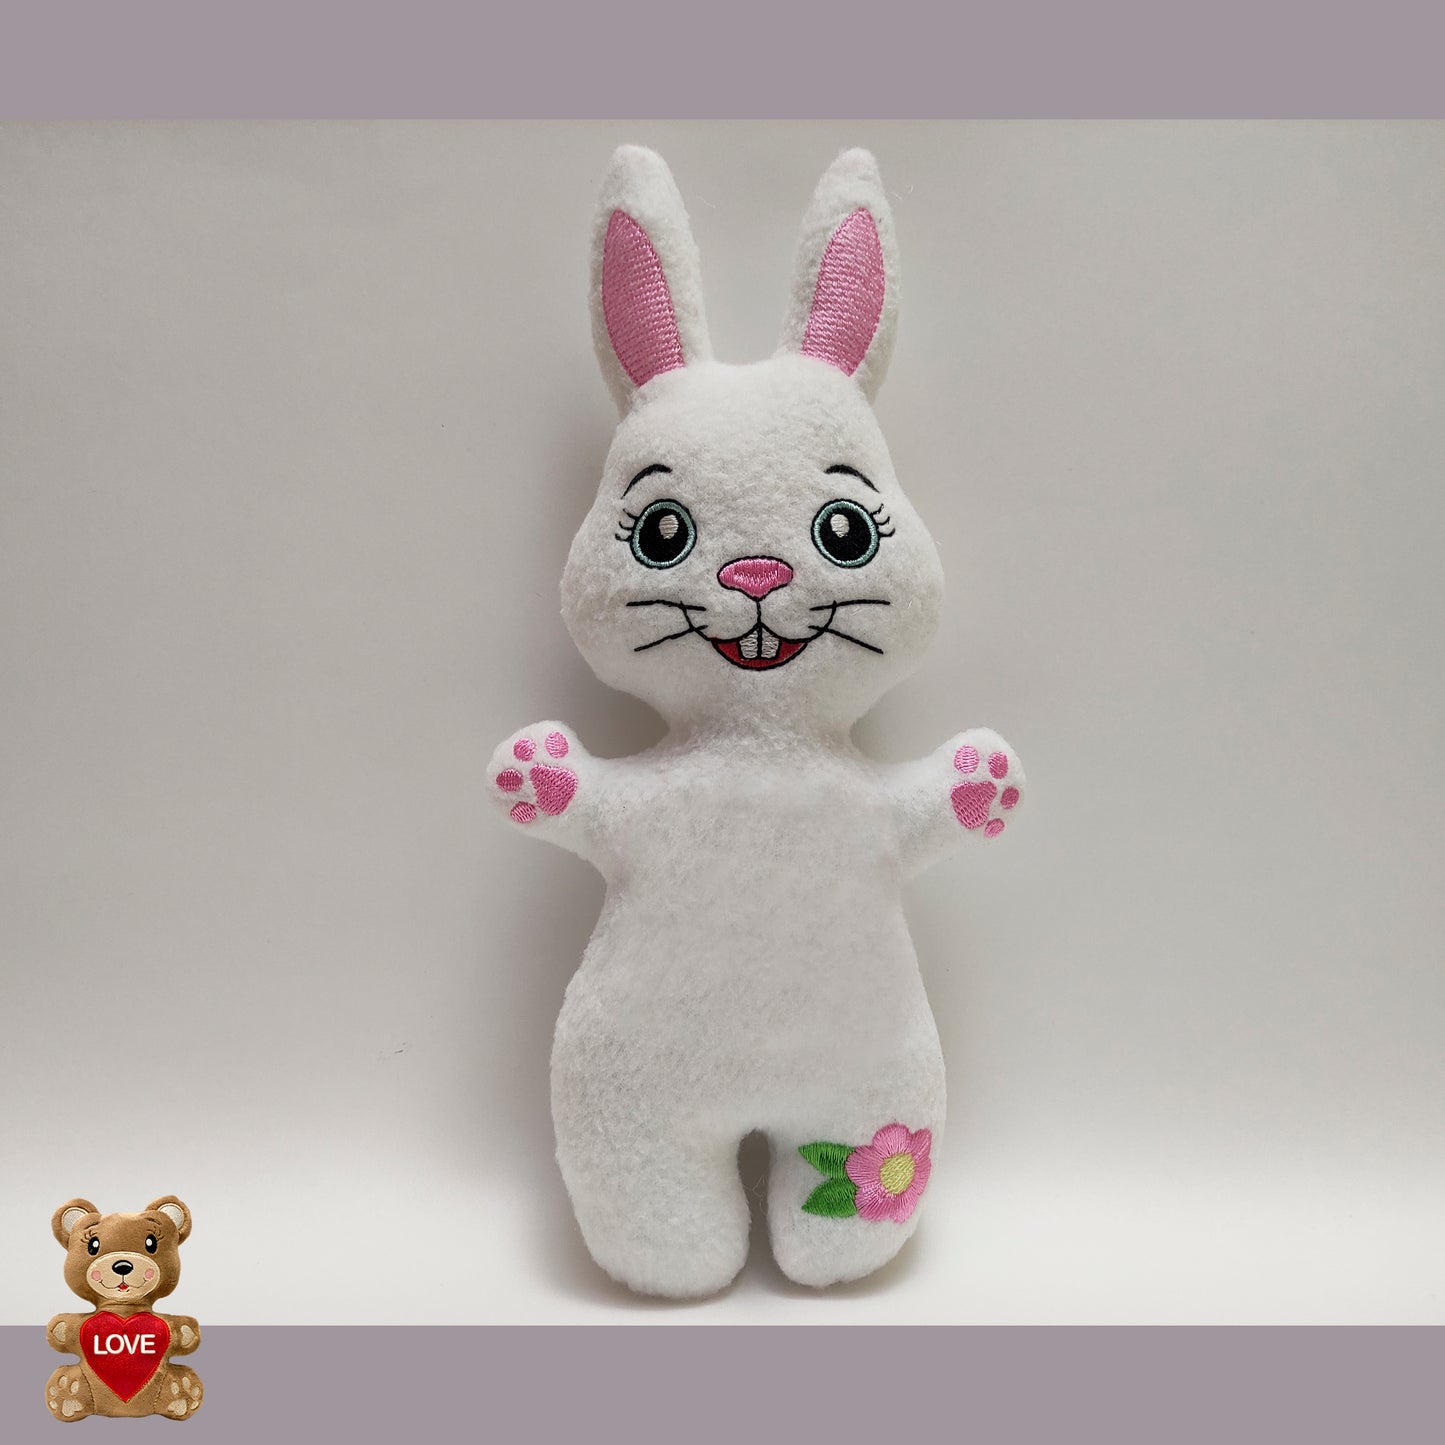 Personalised Bunny Easter Stuffed Toy ,Super cute personalised soft plush toy, Personalised Gift, Unique Personalized Birthday Gifts , Custom Gifts For Children